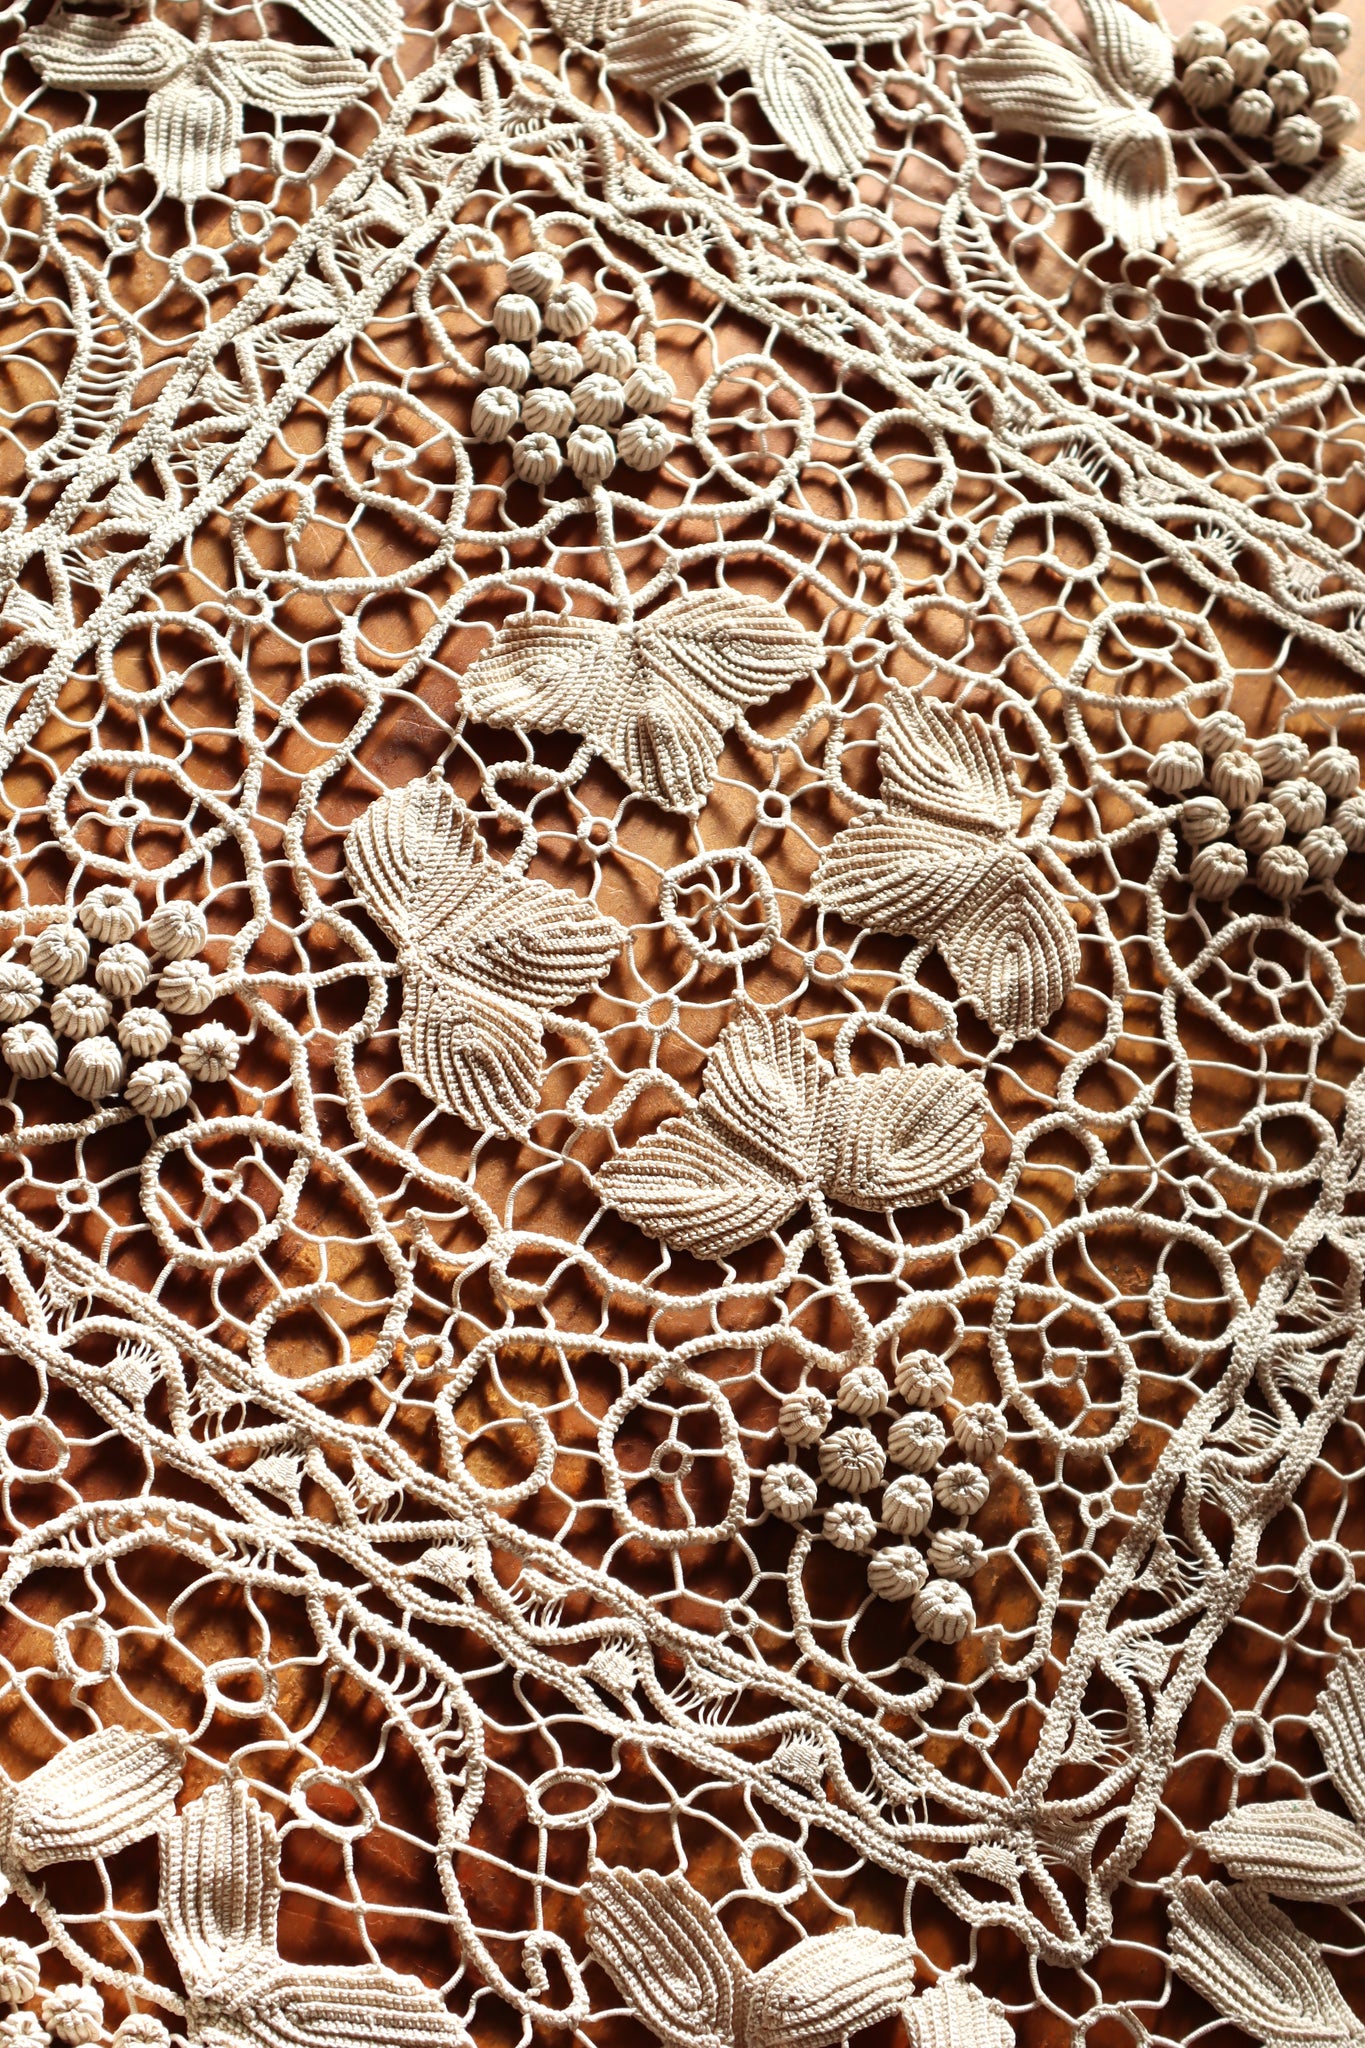 1910s Antique Crochet Lace Table Covering